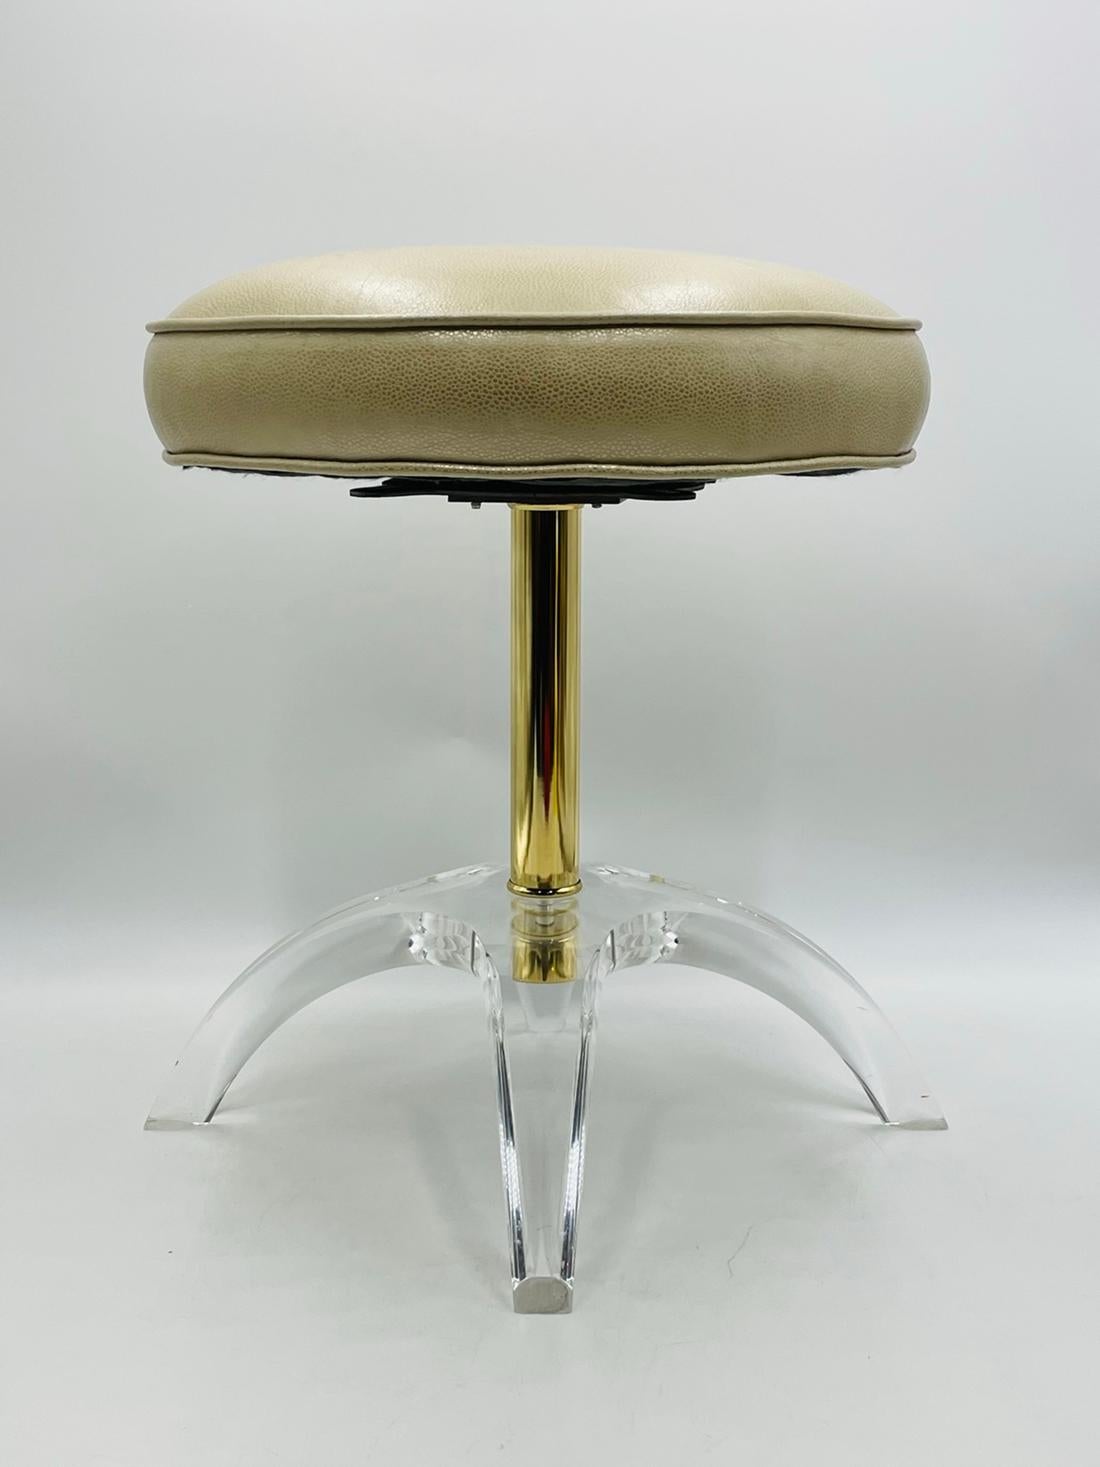 Stunning vanity stool designed and manufactured in the 1960s by Charles Hollis Jones.

The stool has a sculptural Lucite base with a brass stem/rod and a swivel seat upholstered in a cream color vinyl seat.

The stool is in very good original